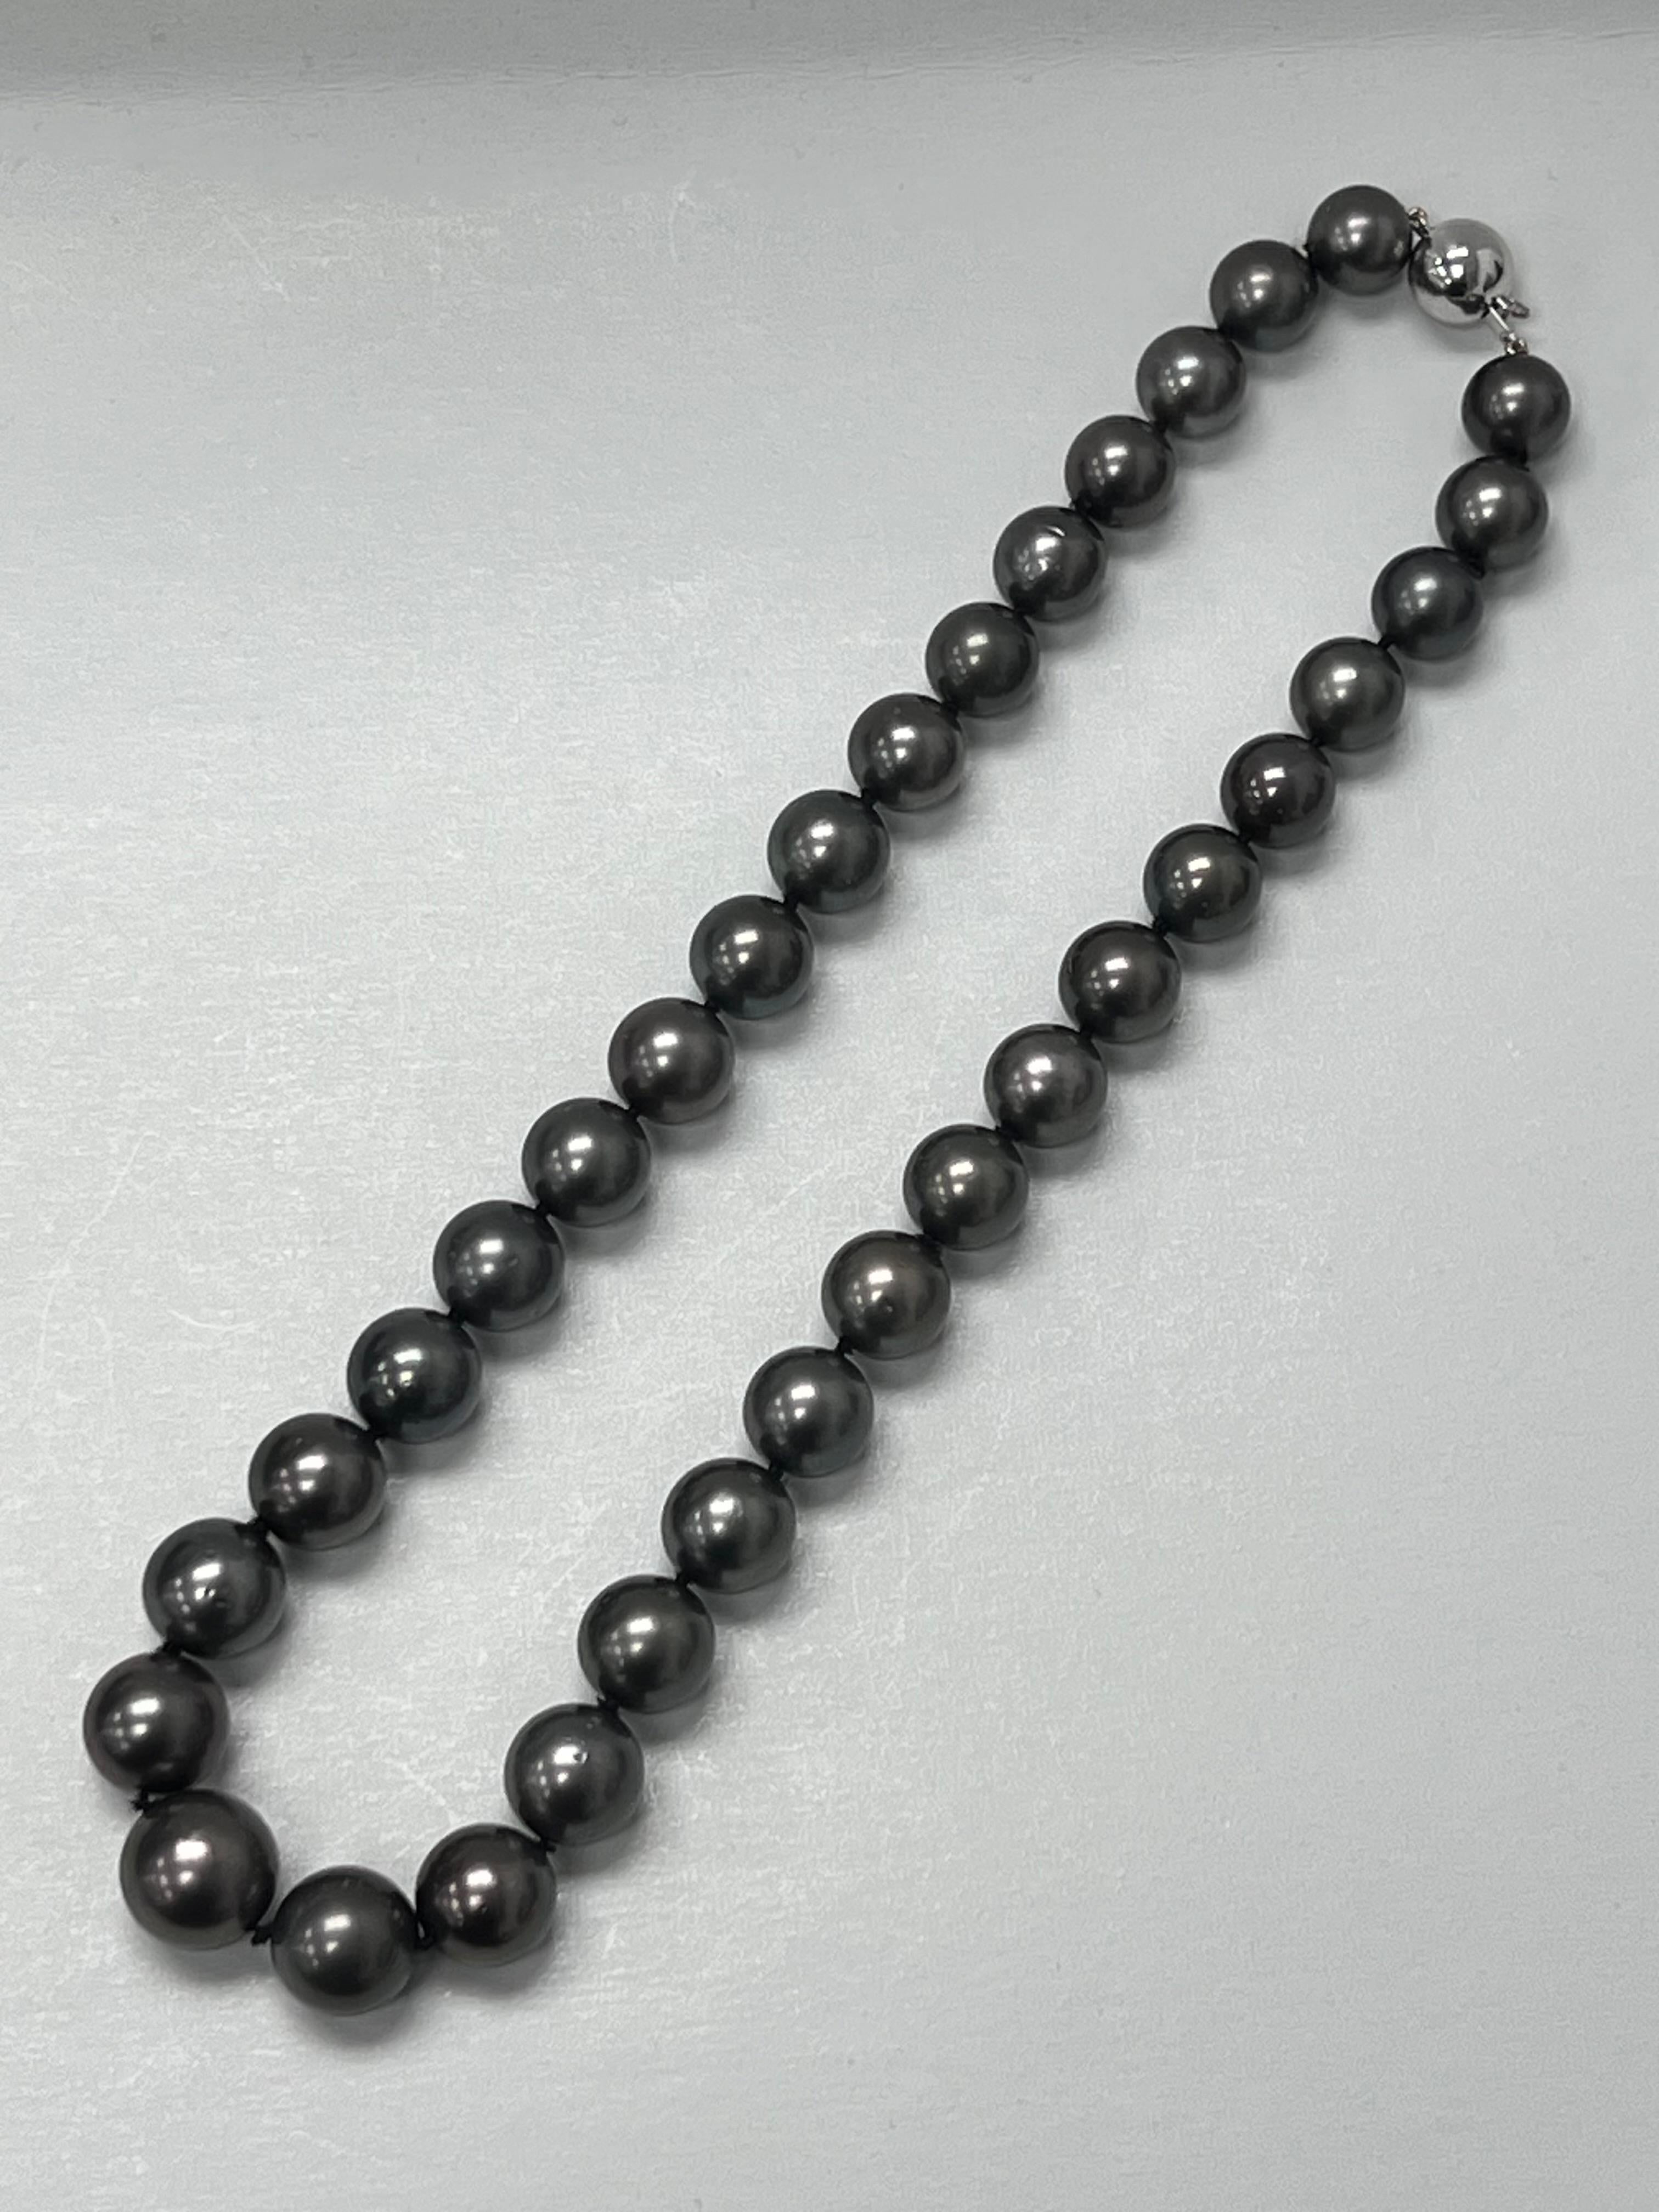 Style and glamour are in the spotlight with this exquisite tahitian pearl necklace. This 14-karat round cut necklace is made from 33 pearls with a solid white gold ball clasp. The size of the pearls is 10.7 - 14.2 mm. The length of this necklace is